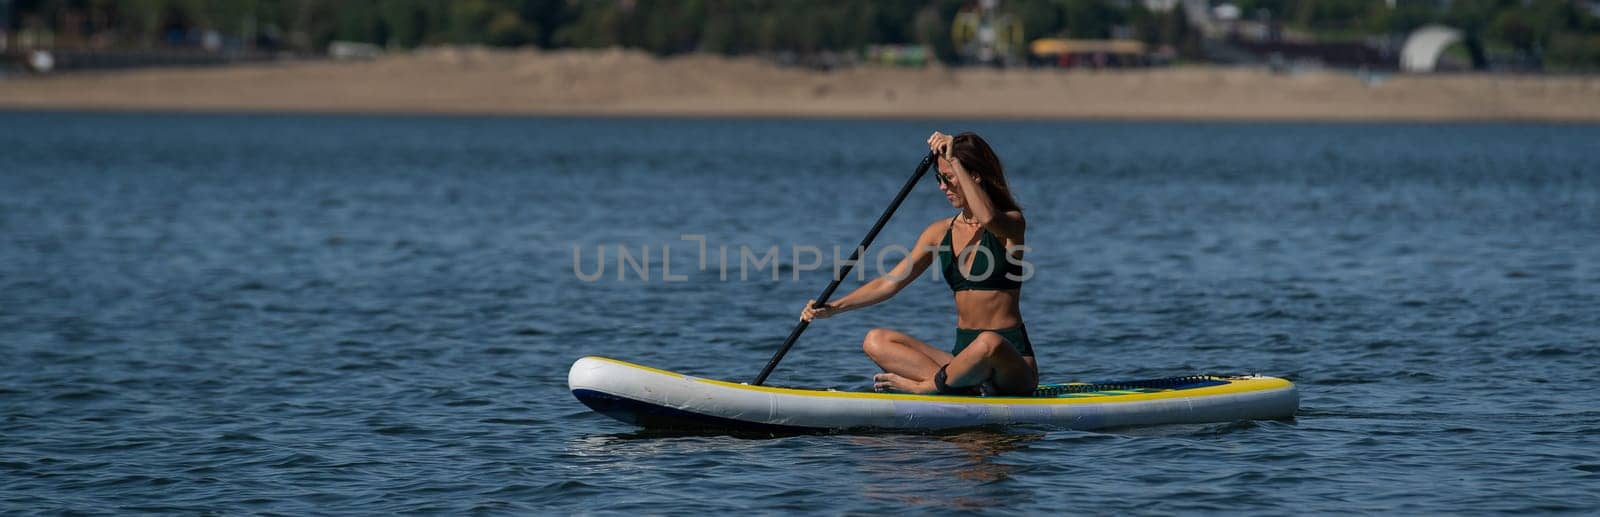 Caucasian woman is riding a SUP board on the river in the city. Summer sport